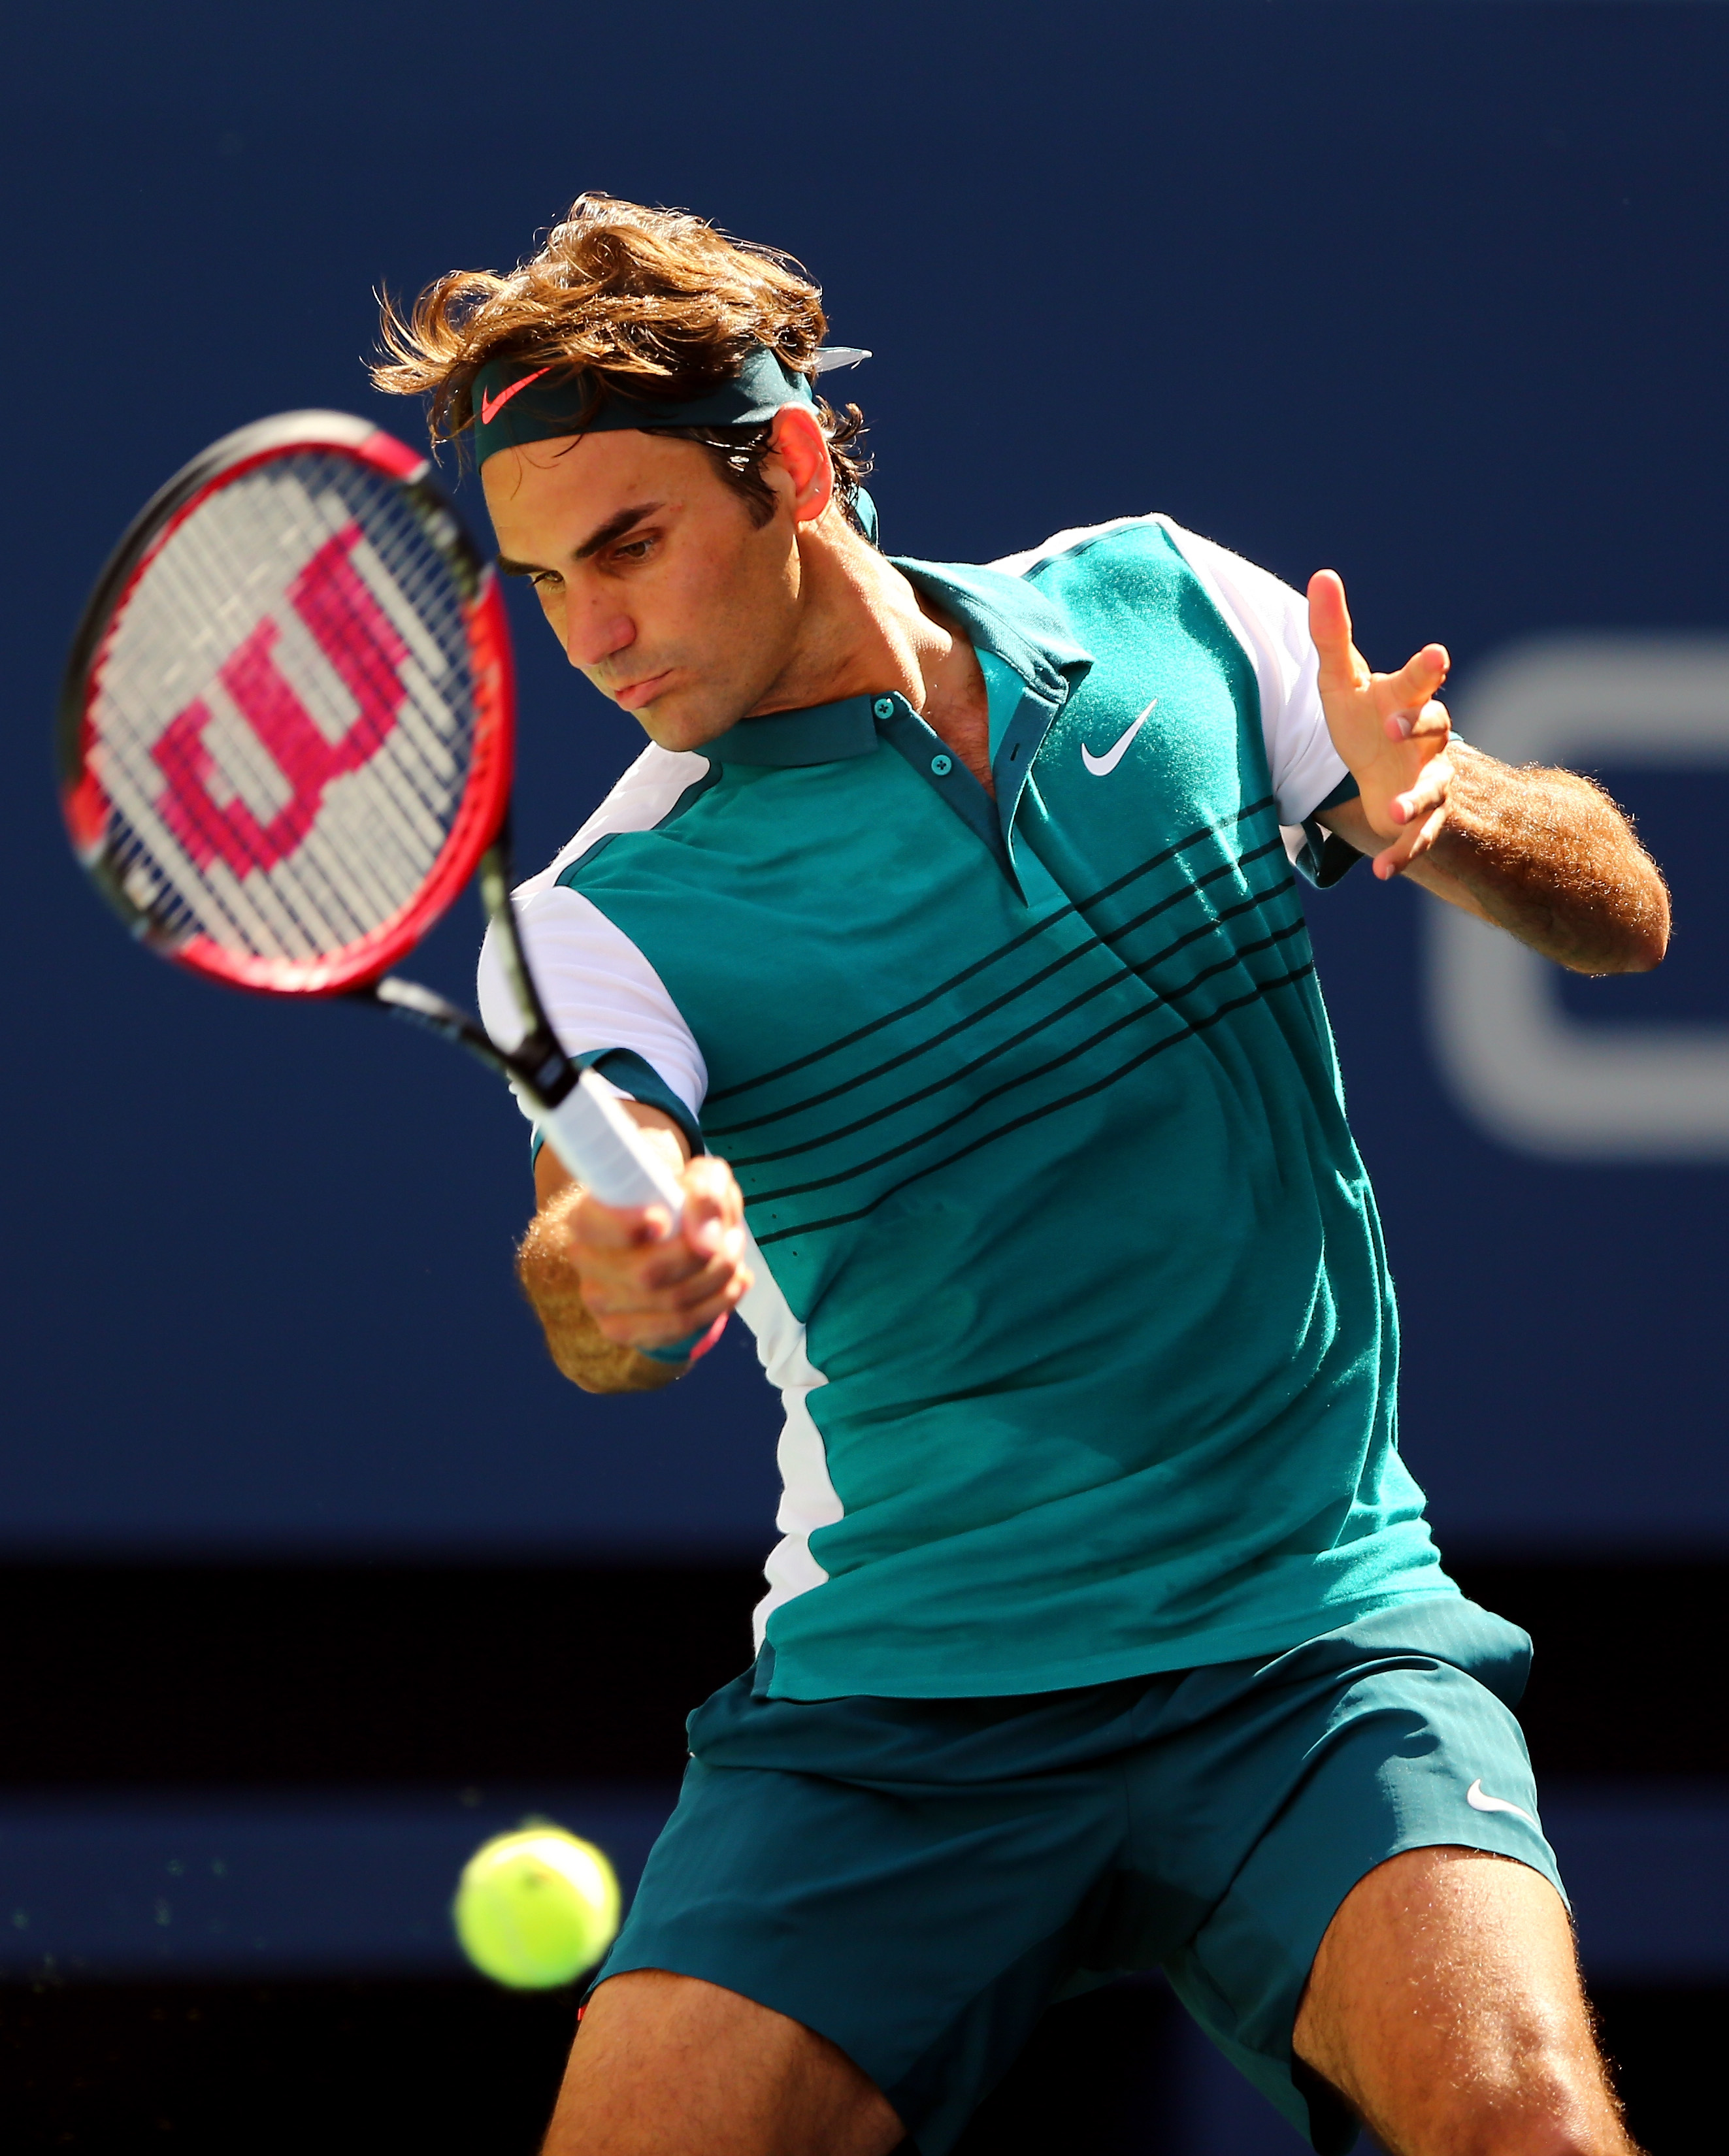 Roger Federer of Switzerland returns a shot to Philipp Kohlschreiber of Germany during their Men's Singles Third Round match on Day Six of the 2015 US Open on Sept. 5, 2015 .